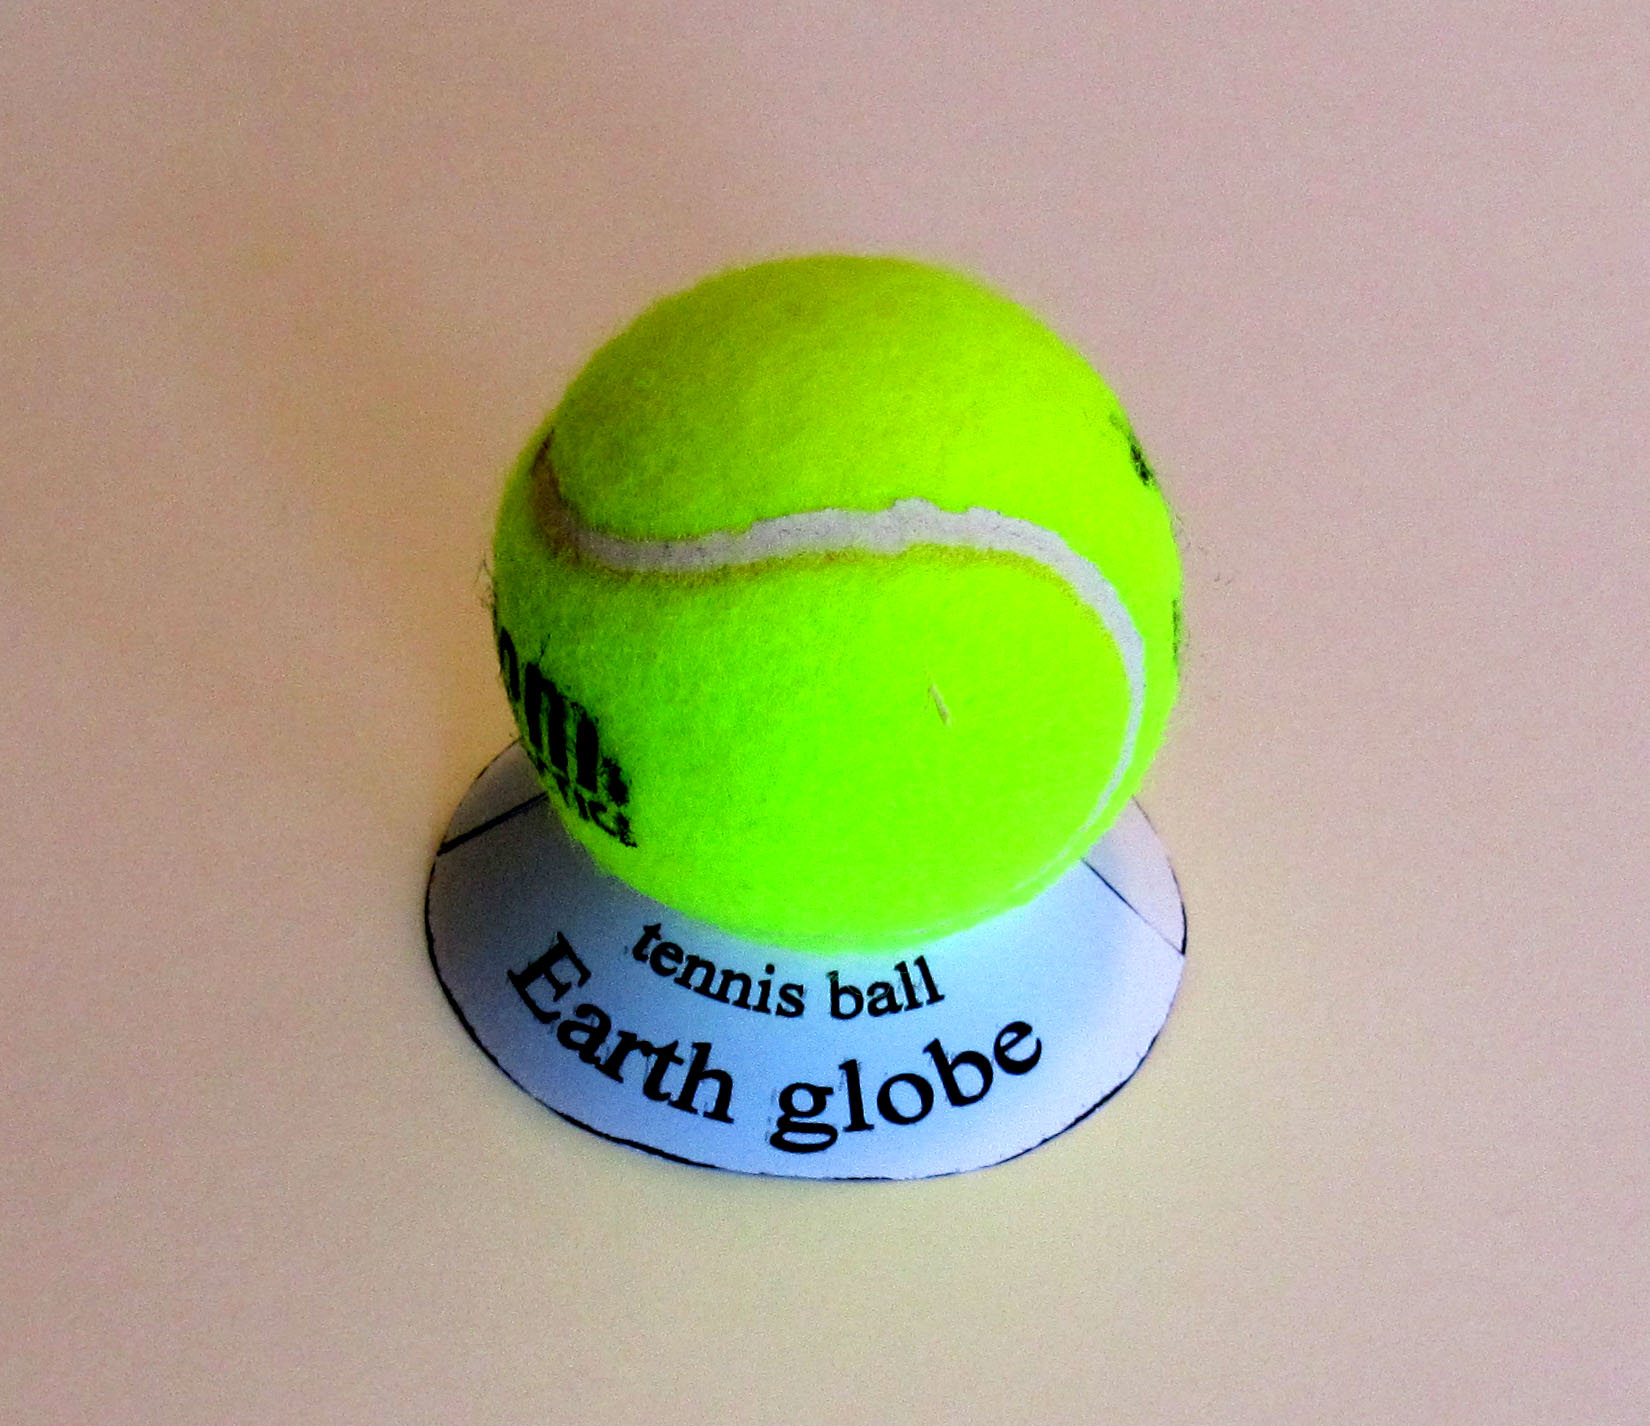 picture of tennis ball model